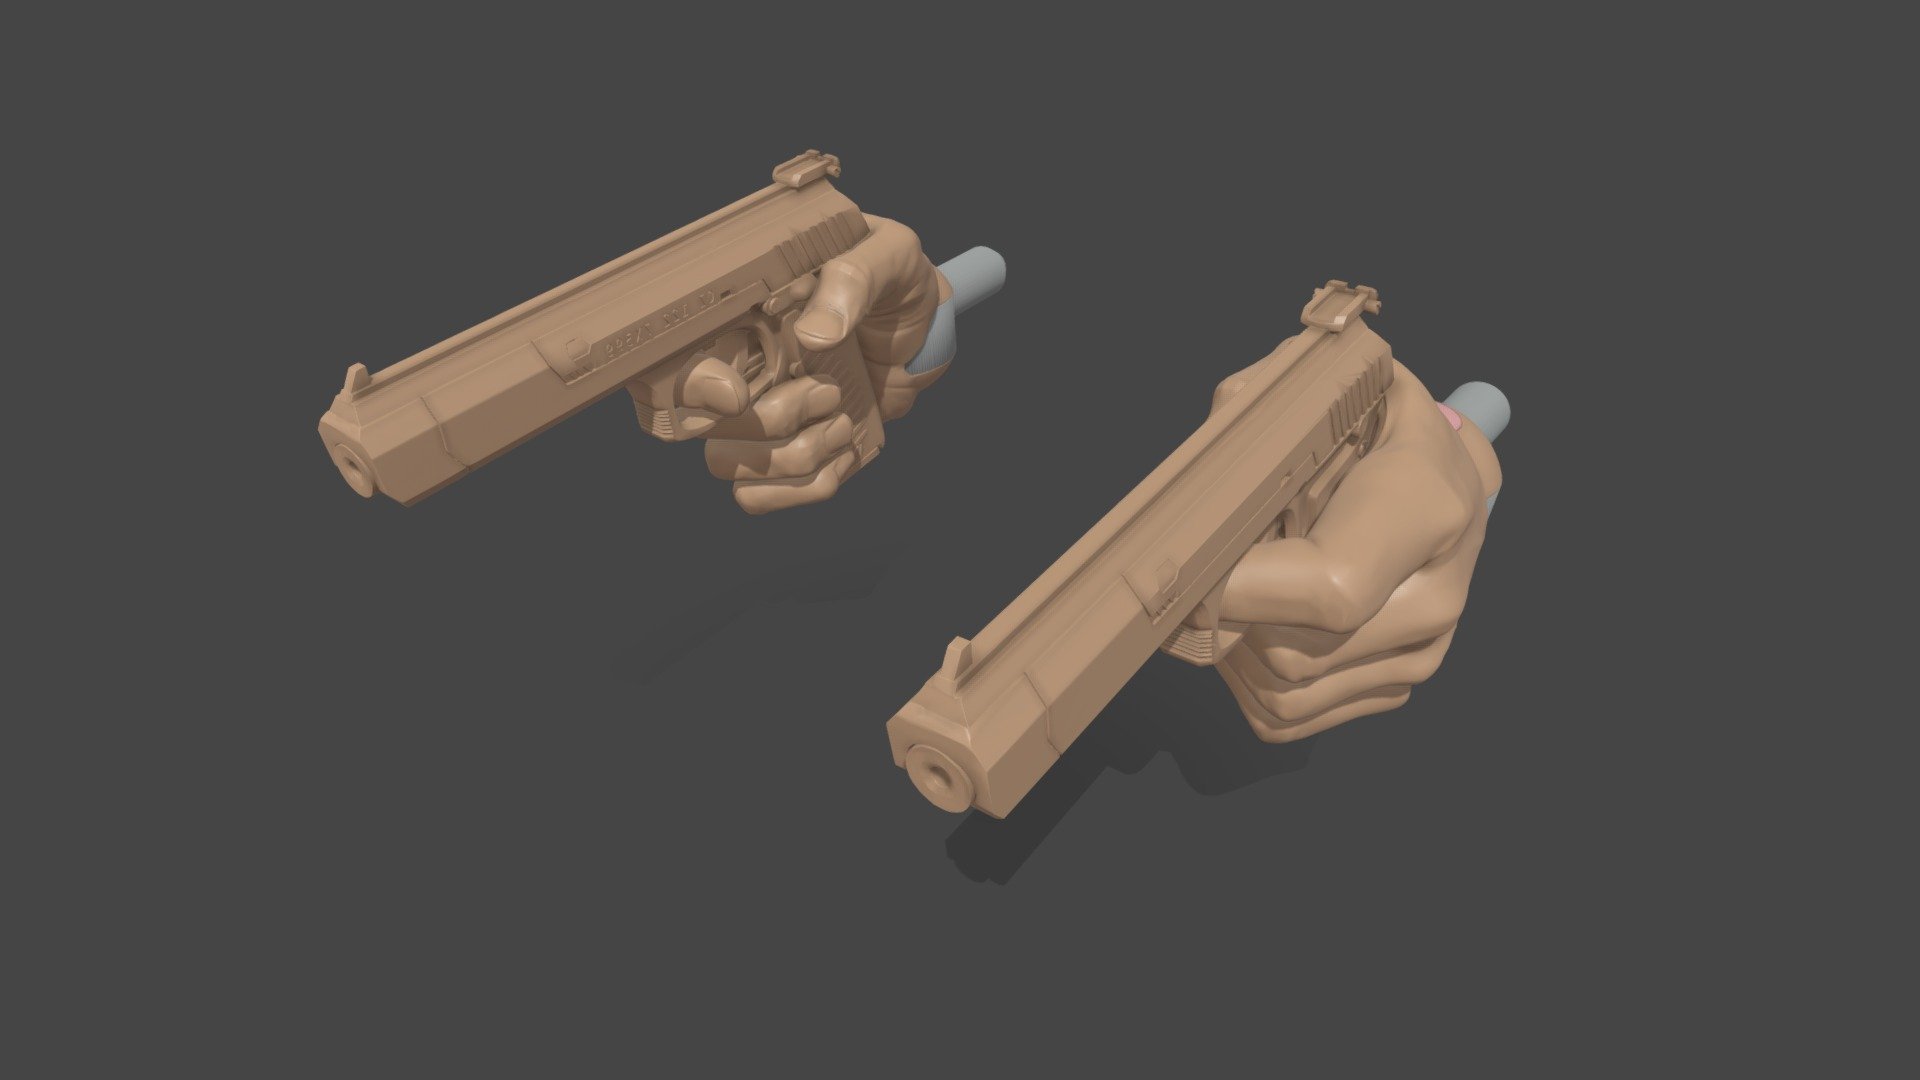 A pair of Articulated Gun Hands for 3D printing.  These parts are scaled for a 6